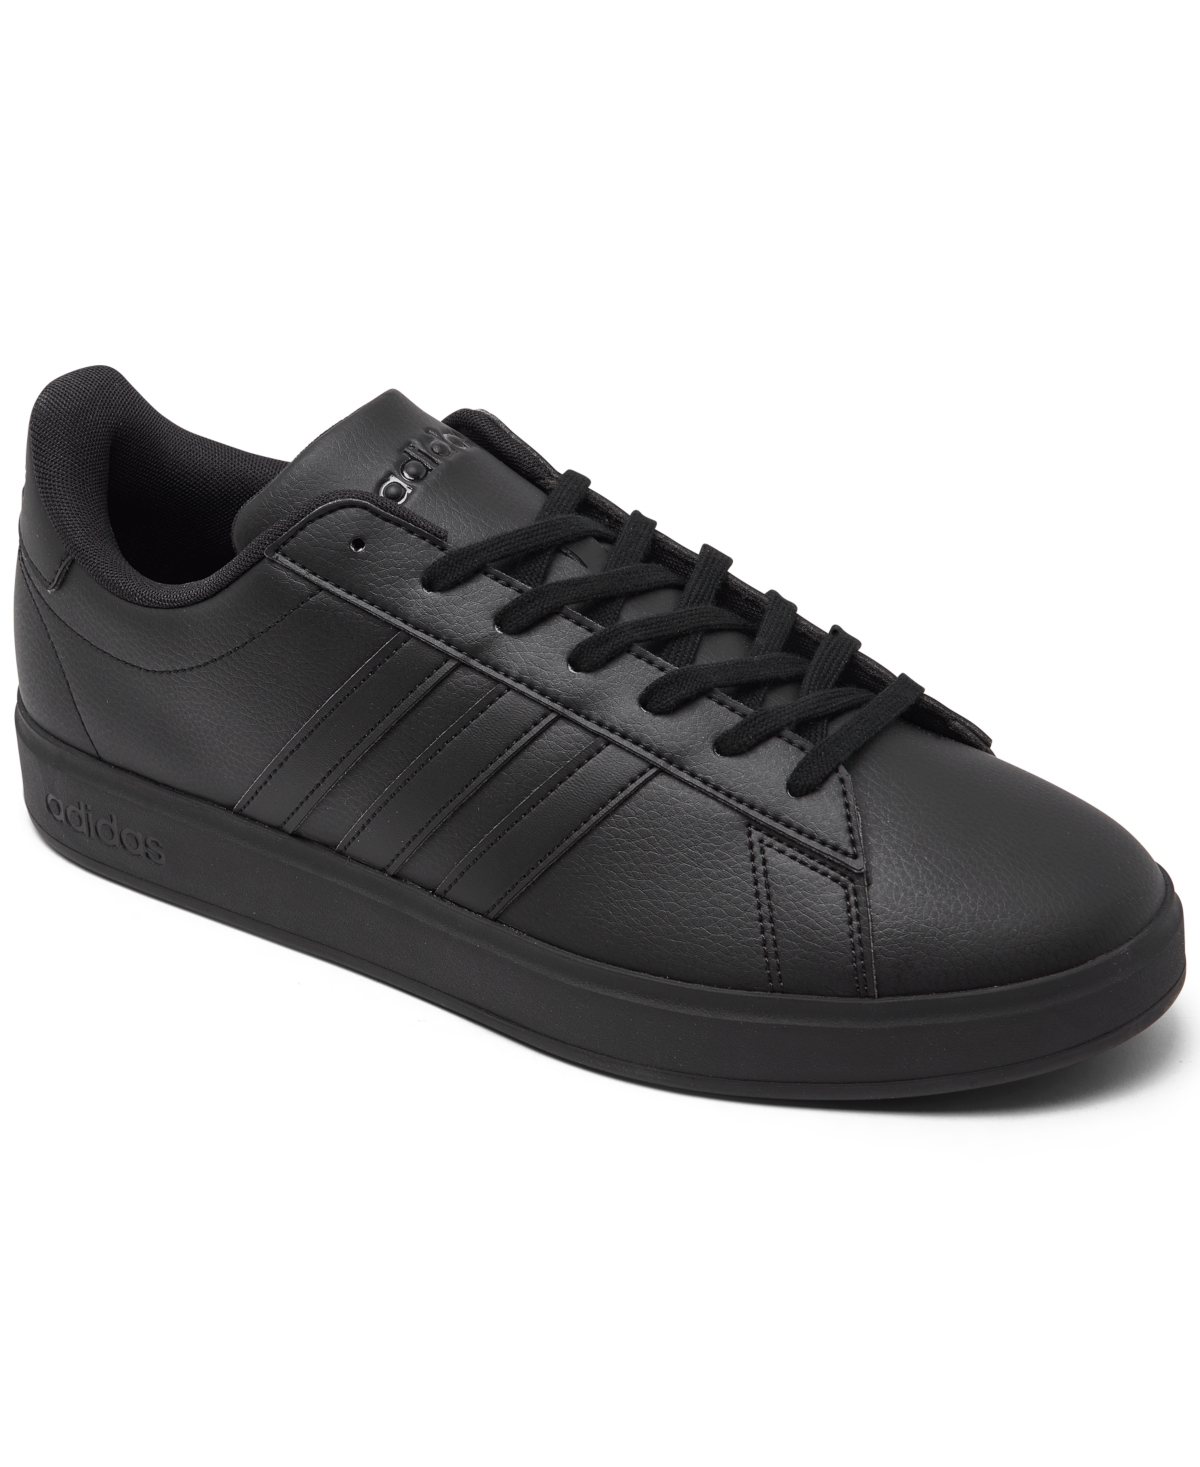 Shop Adidas Originals Men's Grand Court Cloudfoam Comfort Lifestyle Casual Sneakers From Finish Line In Black